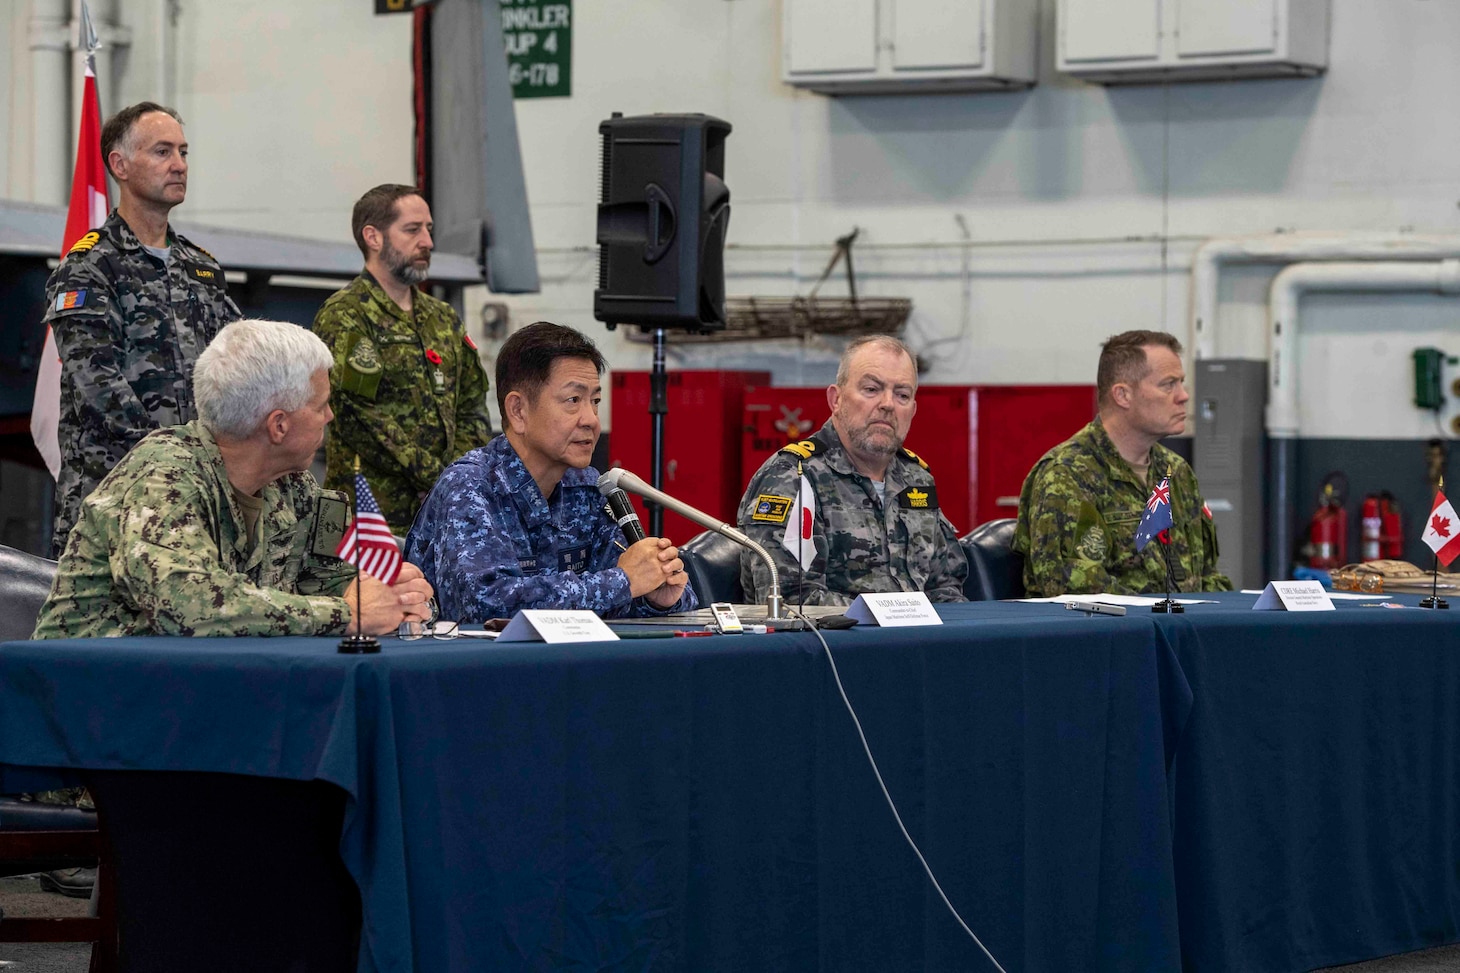 231111-N-TL932-1227 PHILIPPINE SEA (Nov. 11, 2023) Senior leaders from Canada, Australia, Japan and U.S. navies conduct a multilateral press conference aboard Nimitz-class aircraft carrier USS Carl Vinson (CVN 70) during Annual Exercise (ANNUALEX) 2023. ANNUALEX is a multilateral exercise conducted by naval elements of the Royal Australian, Royal Canadian, Japan Maritime Self-Defense Force, and U.S. navies to demonstrate naval interoperability and a joint commitment to a free and open Indo-Pacific. Vinson, flagship of Carrier Strike Group ONE, is deployed to the U.S. 7th Fleet area of operations in support of a free and open Indo-Pacific. (U.S. Navy photo by Mass Communication Specialist 3rd Class Joshua Sapien)